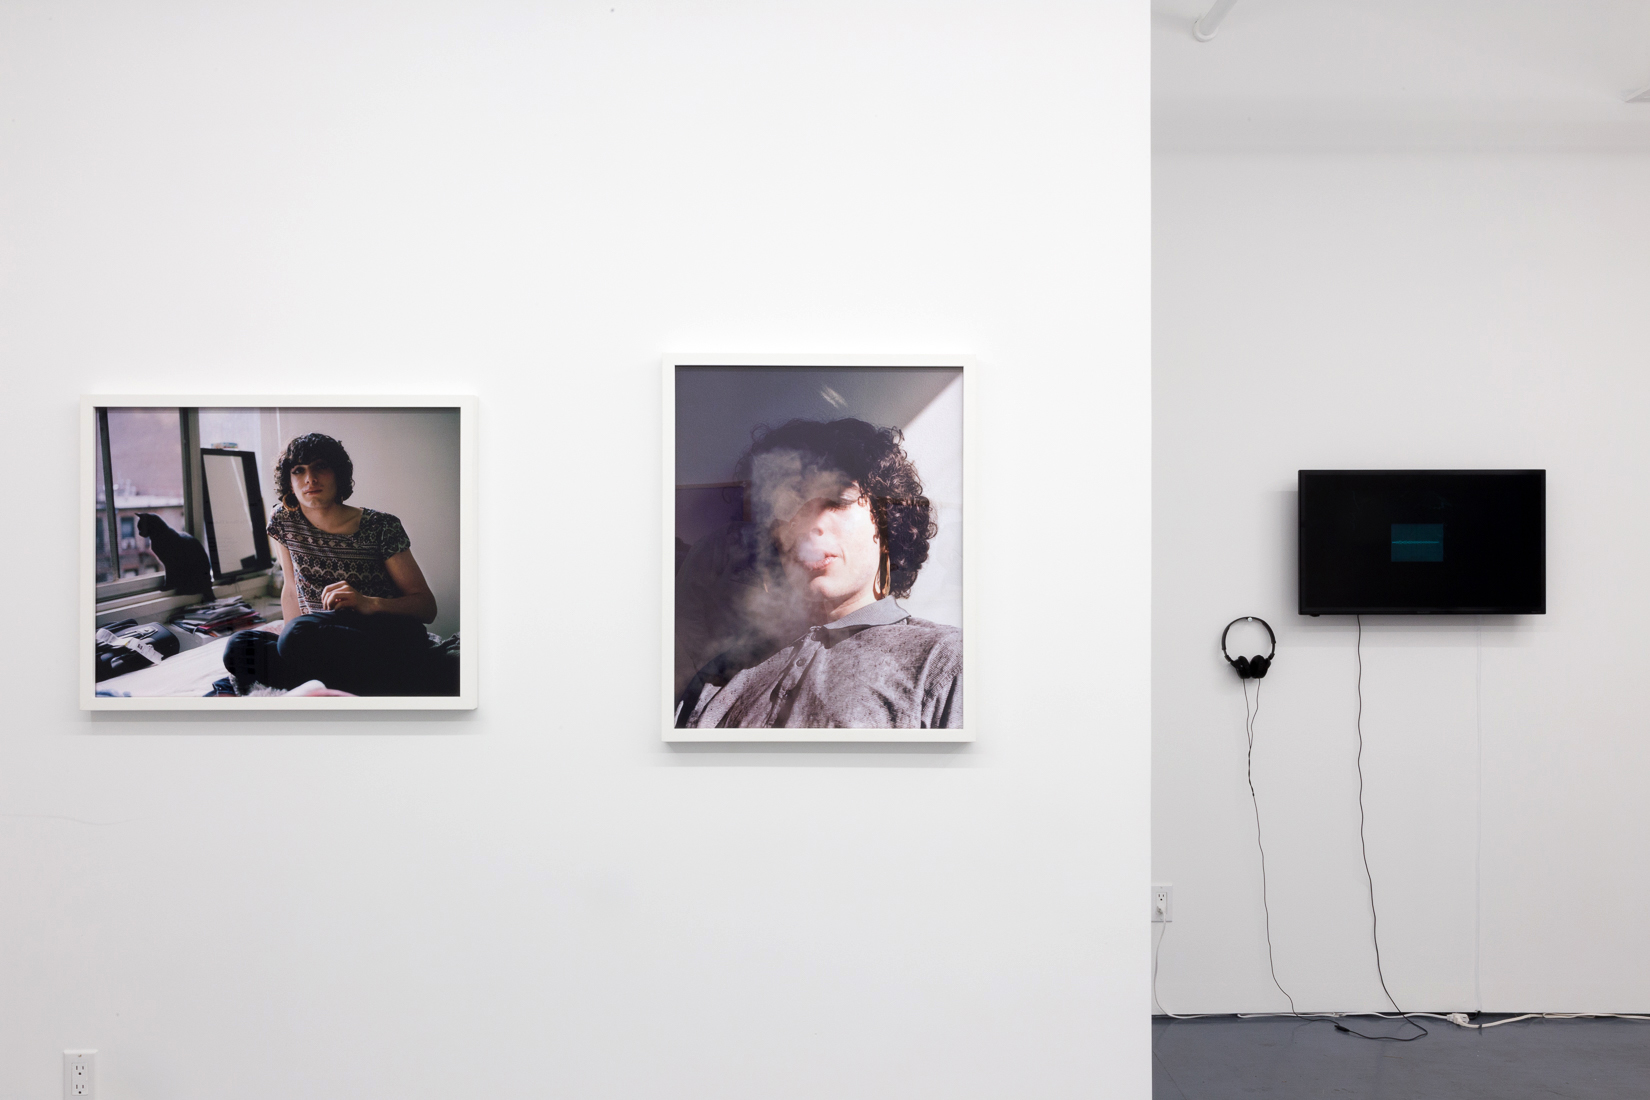  Installation view of the exhibition The Blue Distance at Transmitter 